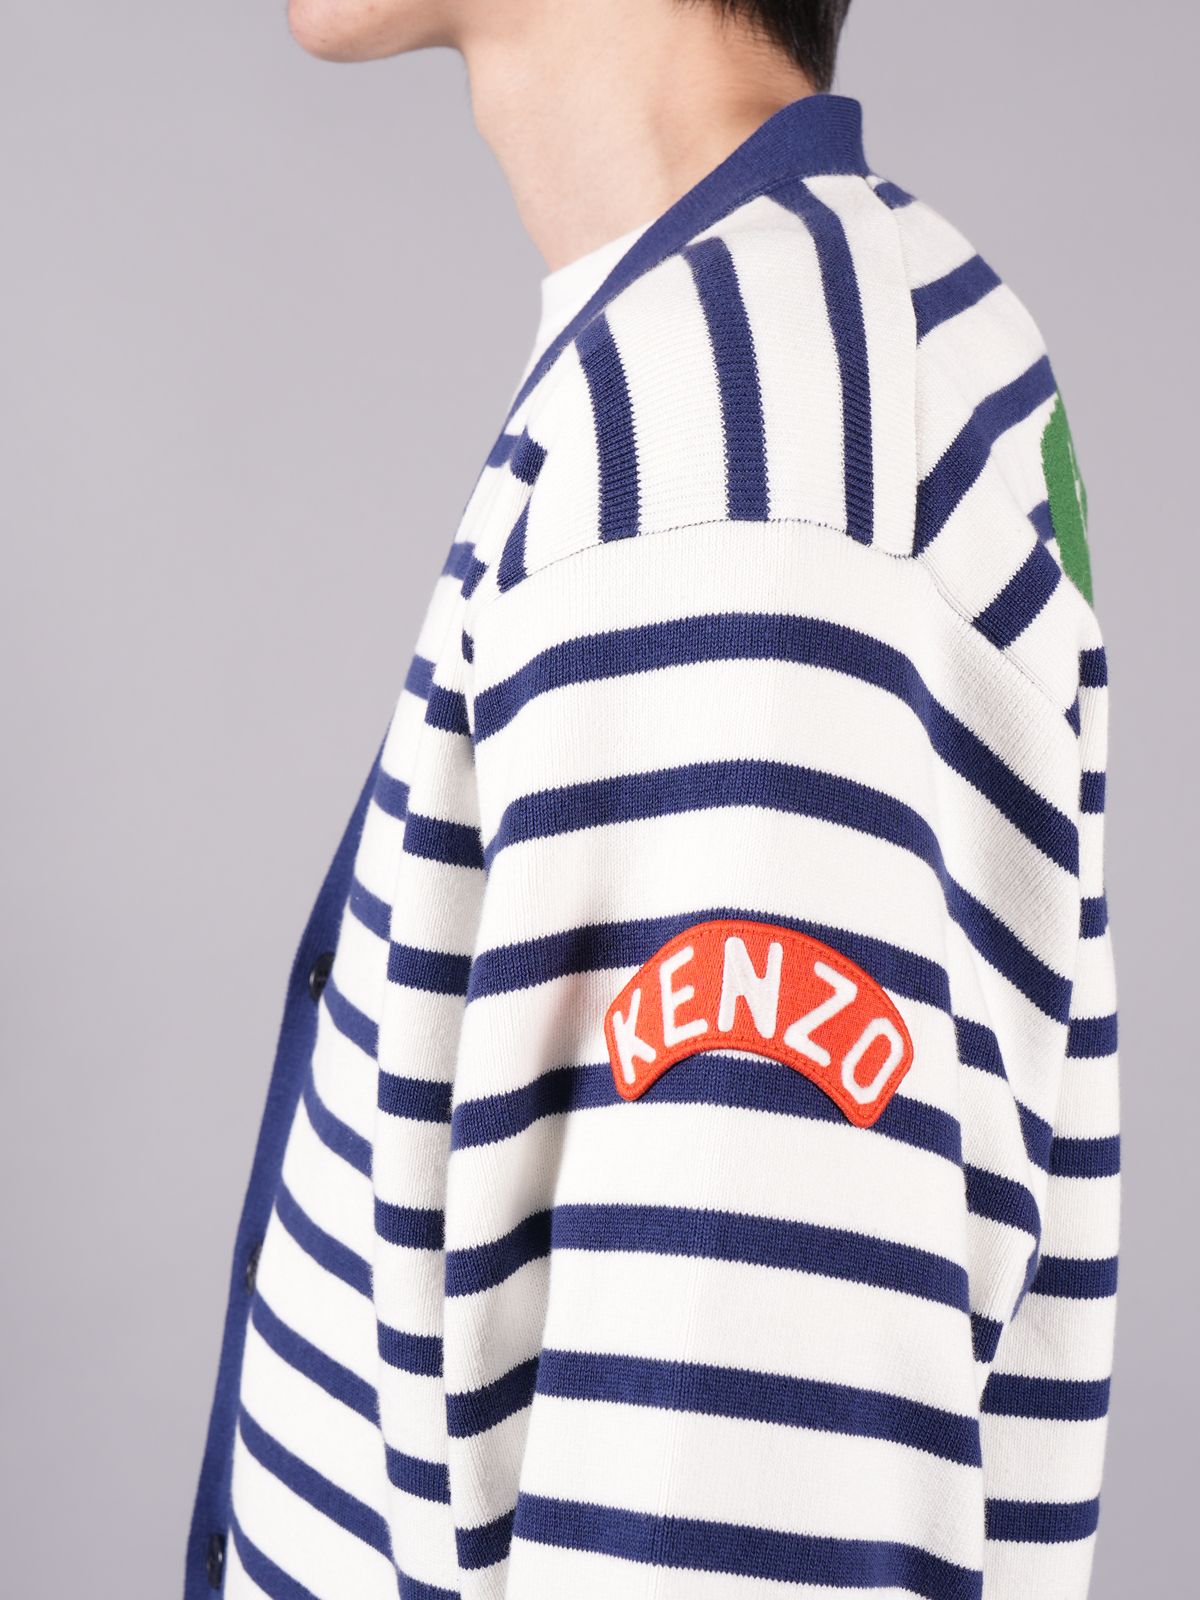 KENZO  Graphic Patch Jumper